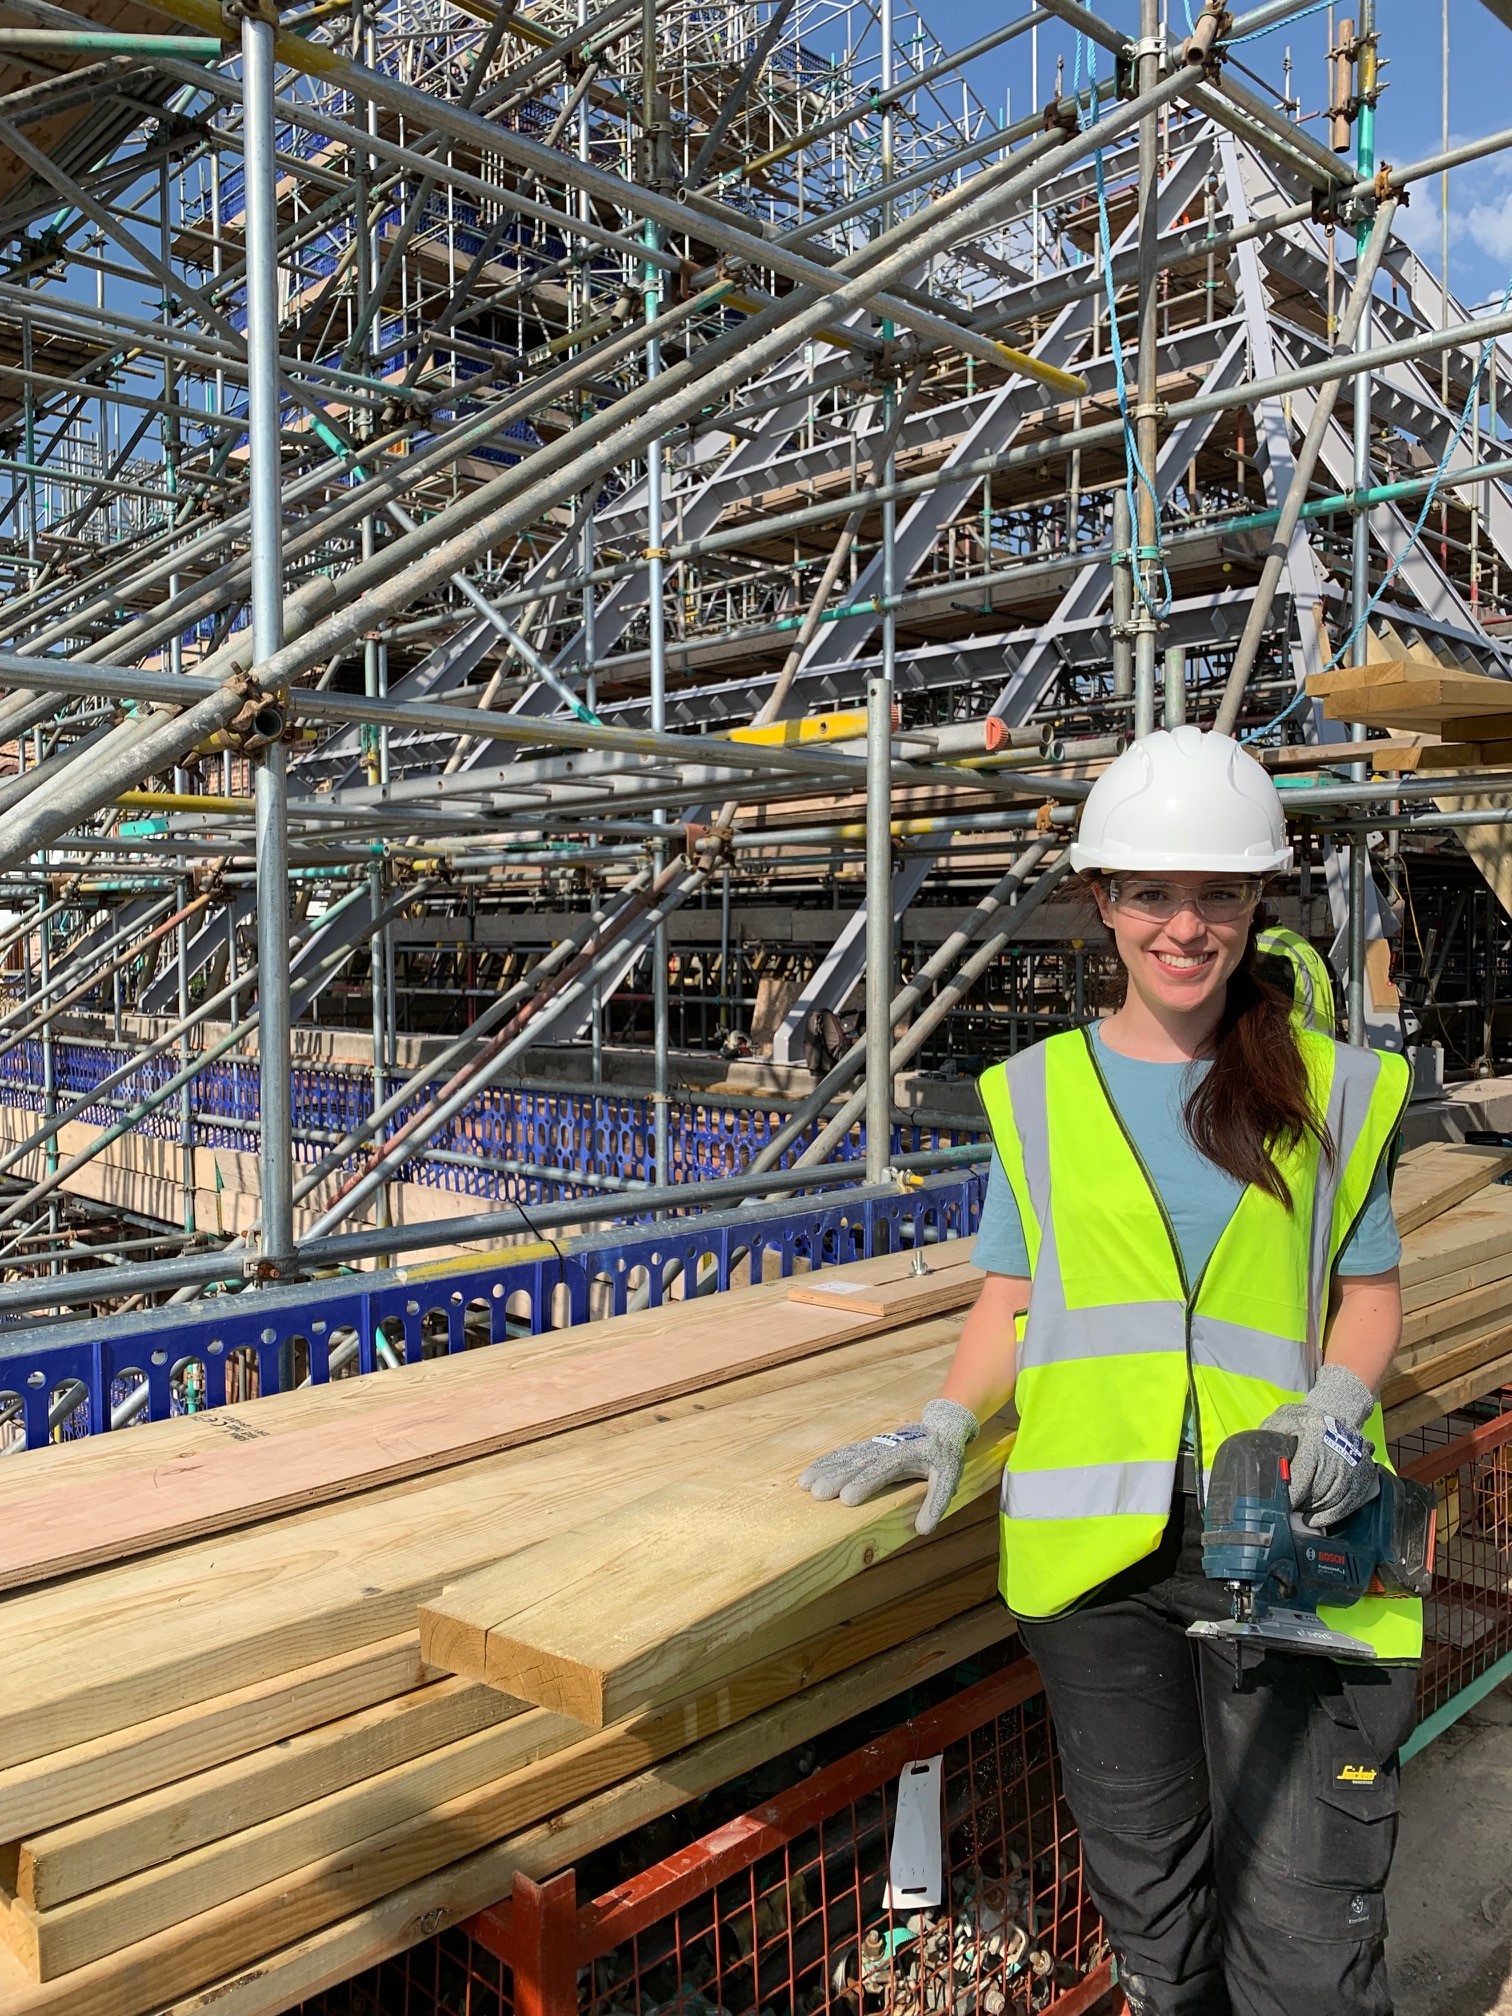 Rosie, wearing hard hat and high viz jacket, completed a carpentry placement working on the Kiln roof